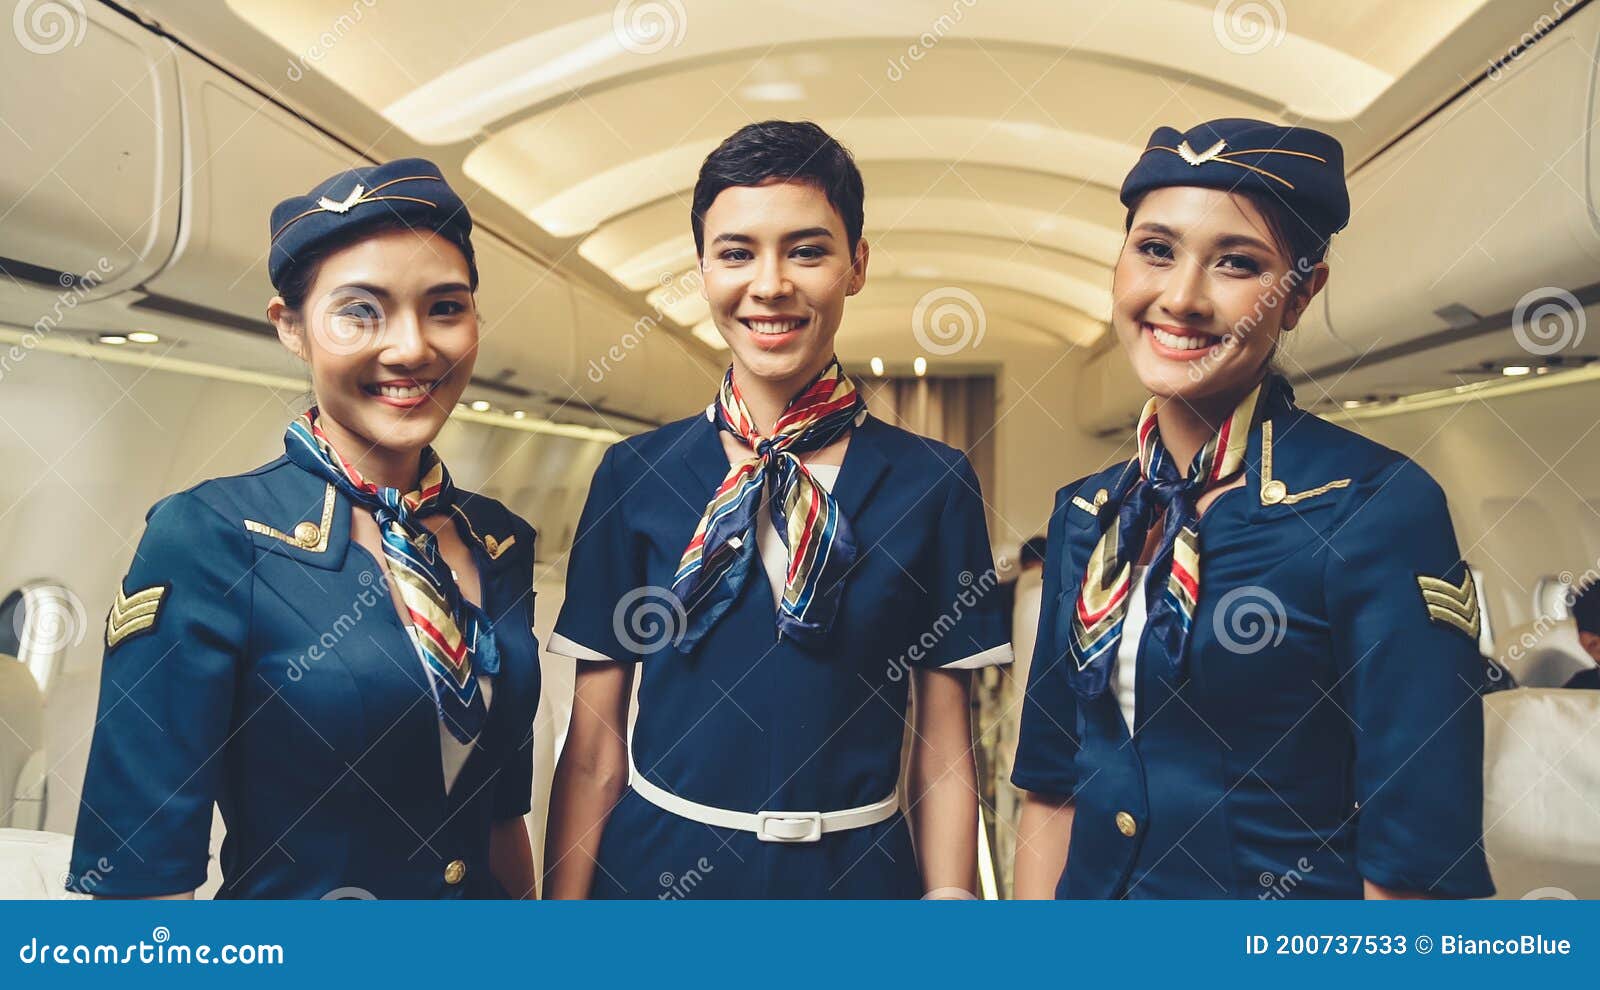 Future Flight Attendant Dream to Travel by Joanna April Aspiring Cabin Crew    HAIRSTYLE  for Female Applicants   For PAL EXPRESS  Your hair  must be tied up in